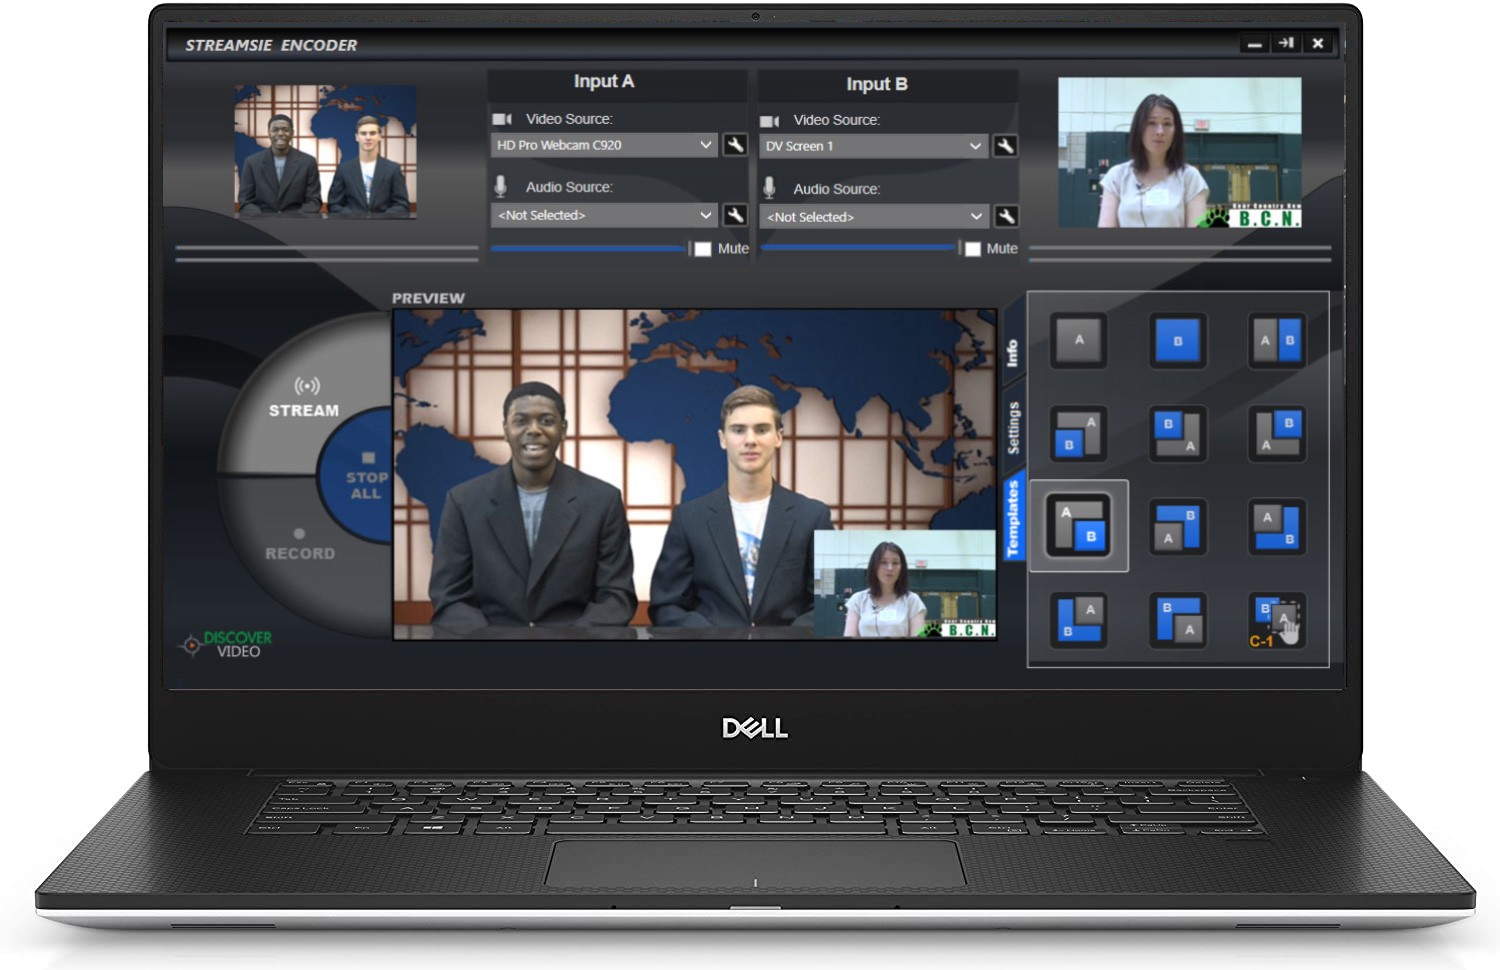 Rover Dedicated Laptop Streaming Encoder System from DiscoverVideo